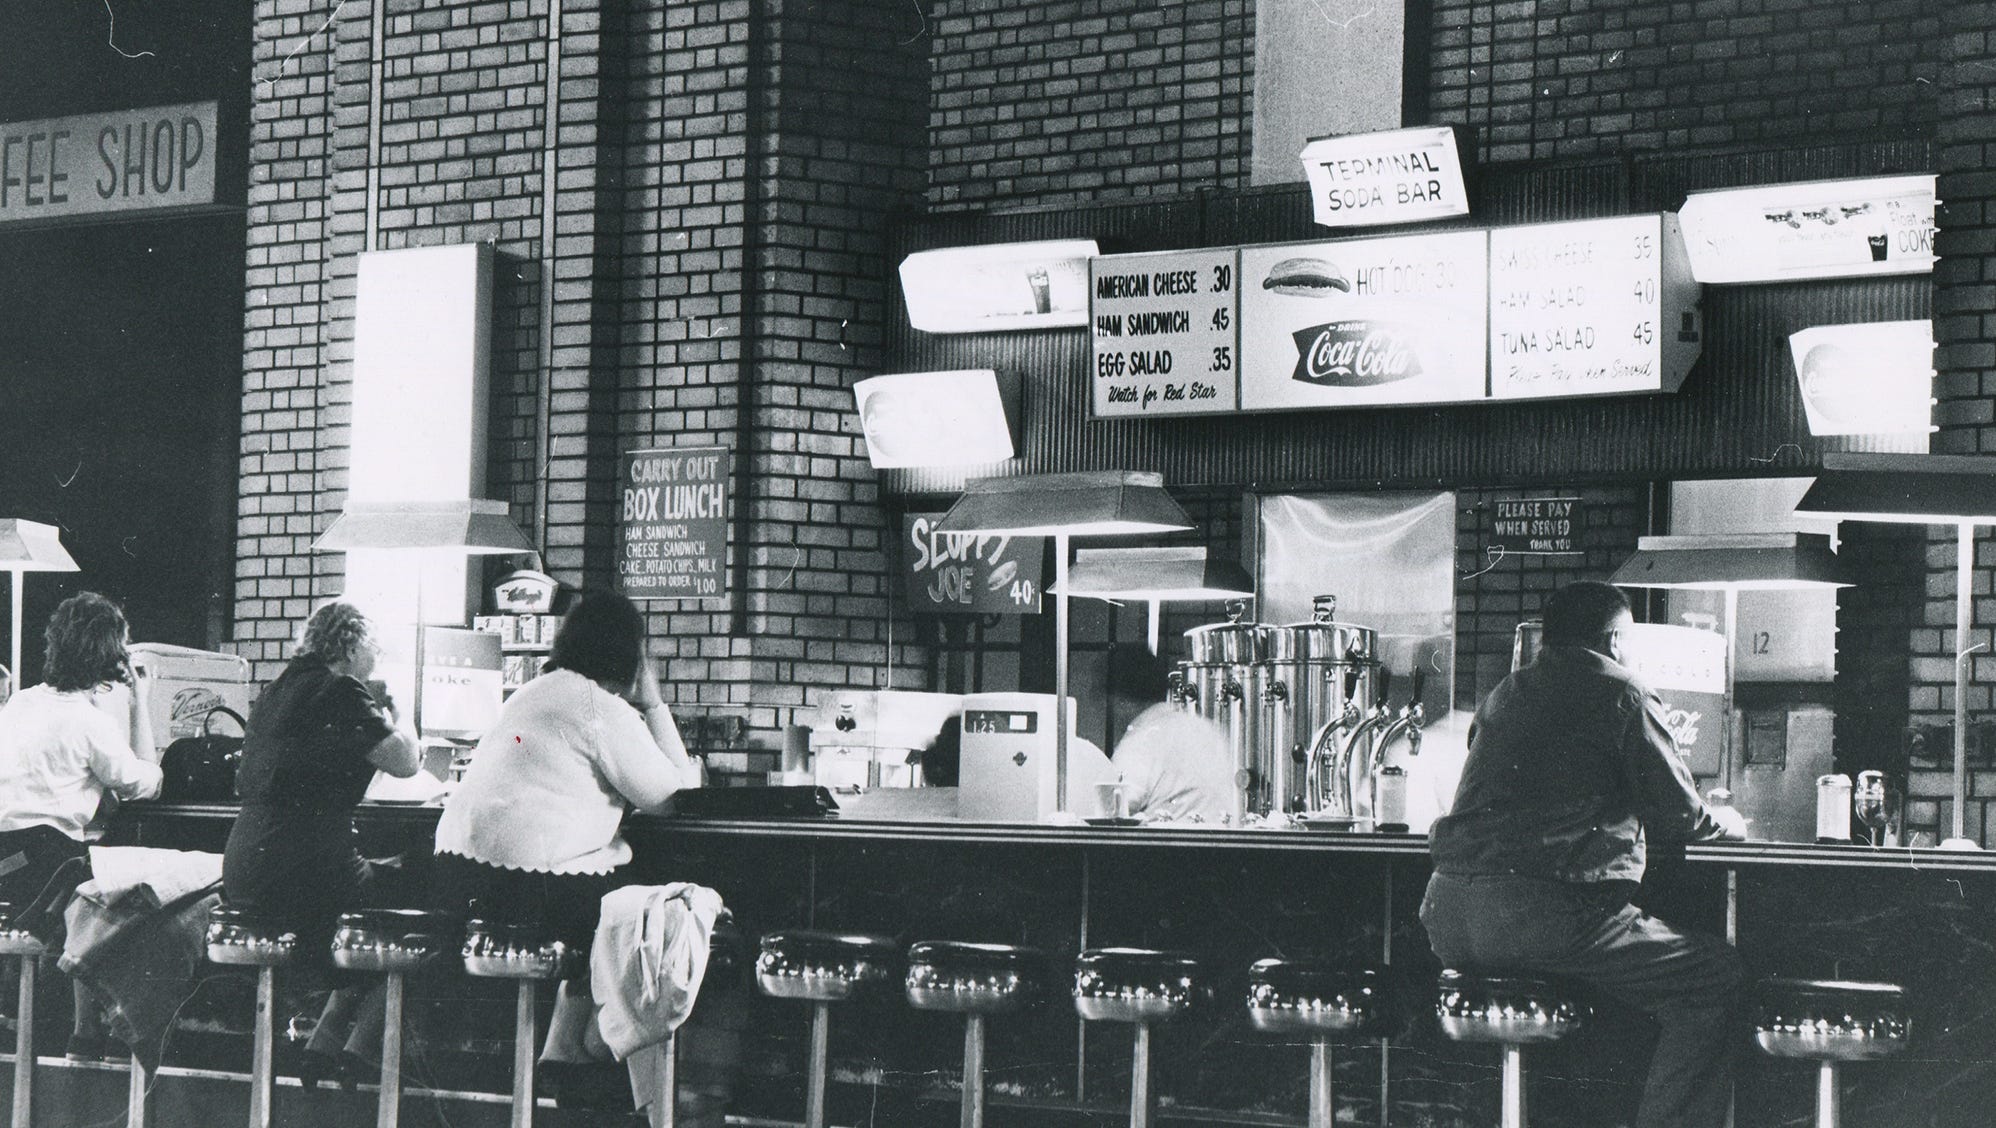 A cheese sandwich costs 30 cents in the Terminal Soda Bar on May 3, 1966.